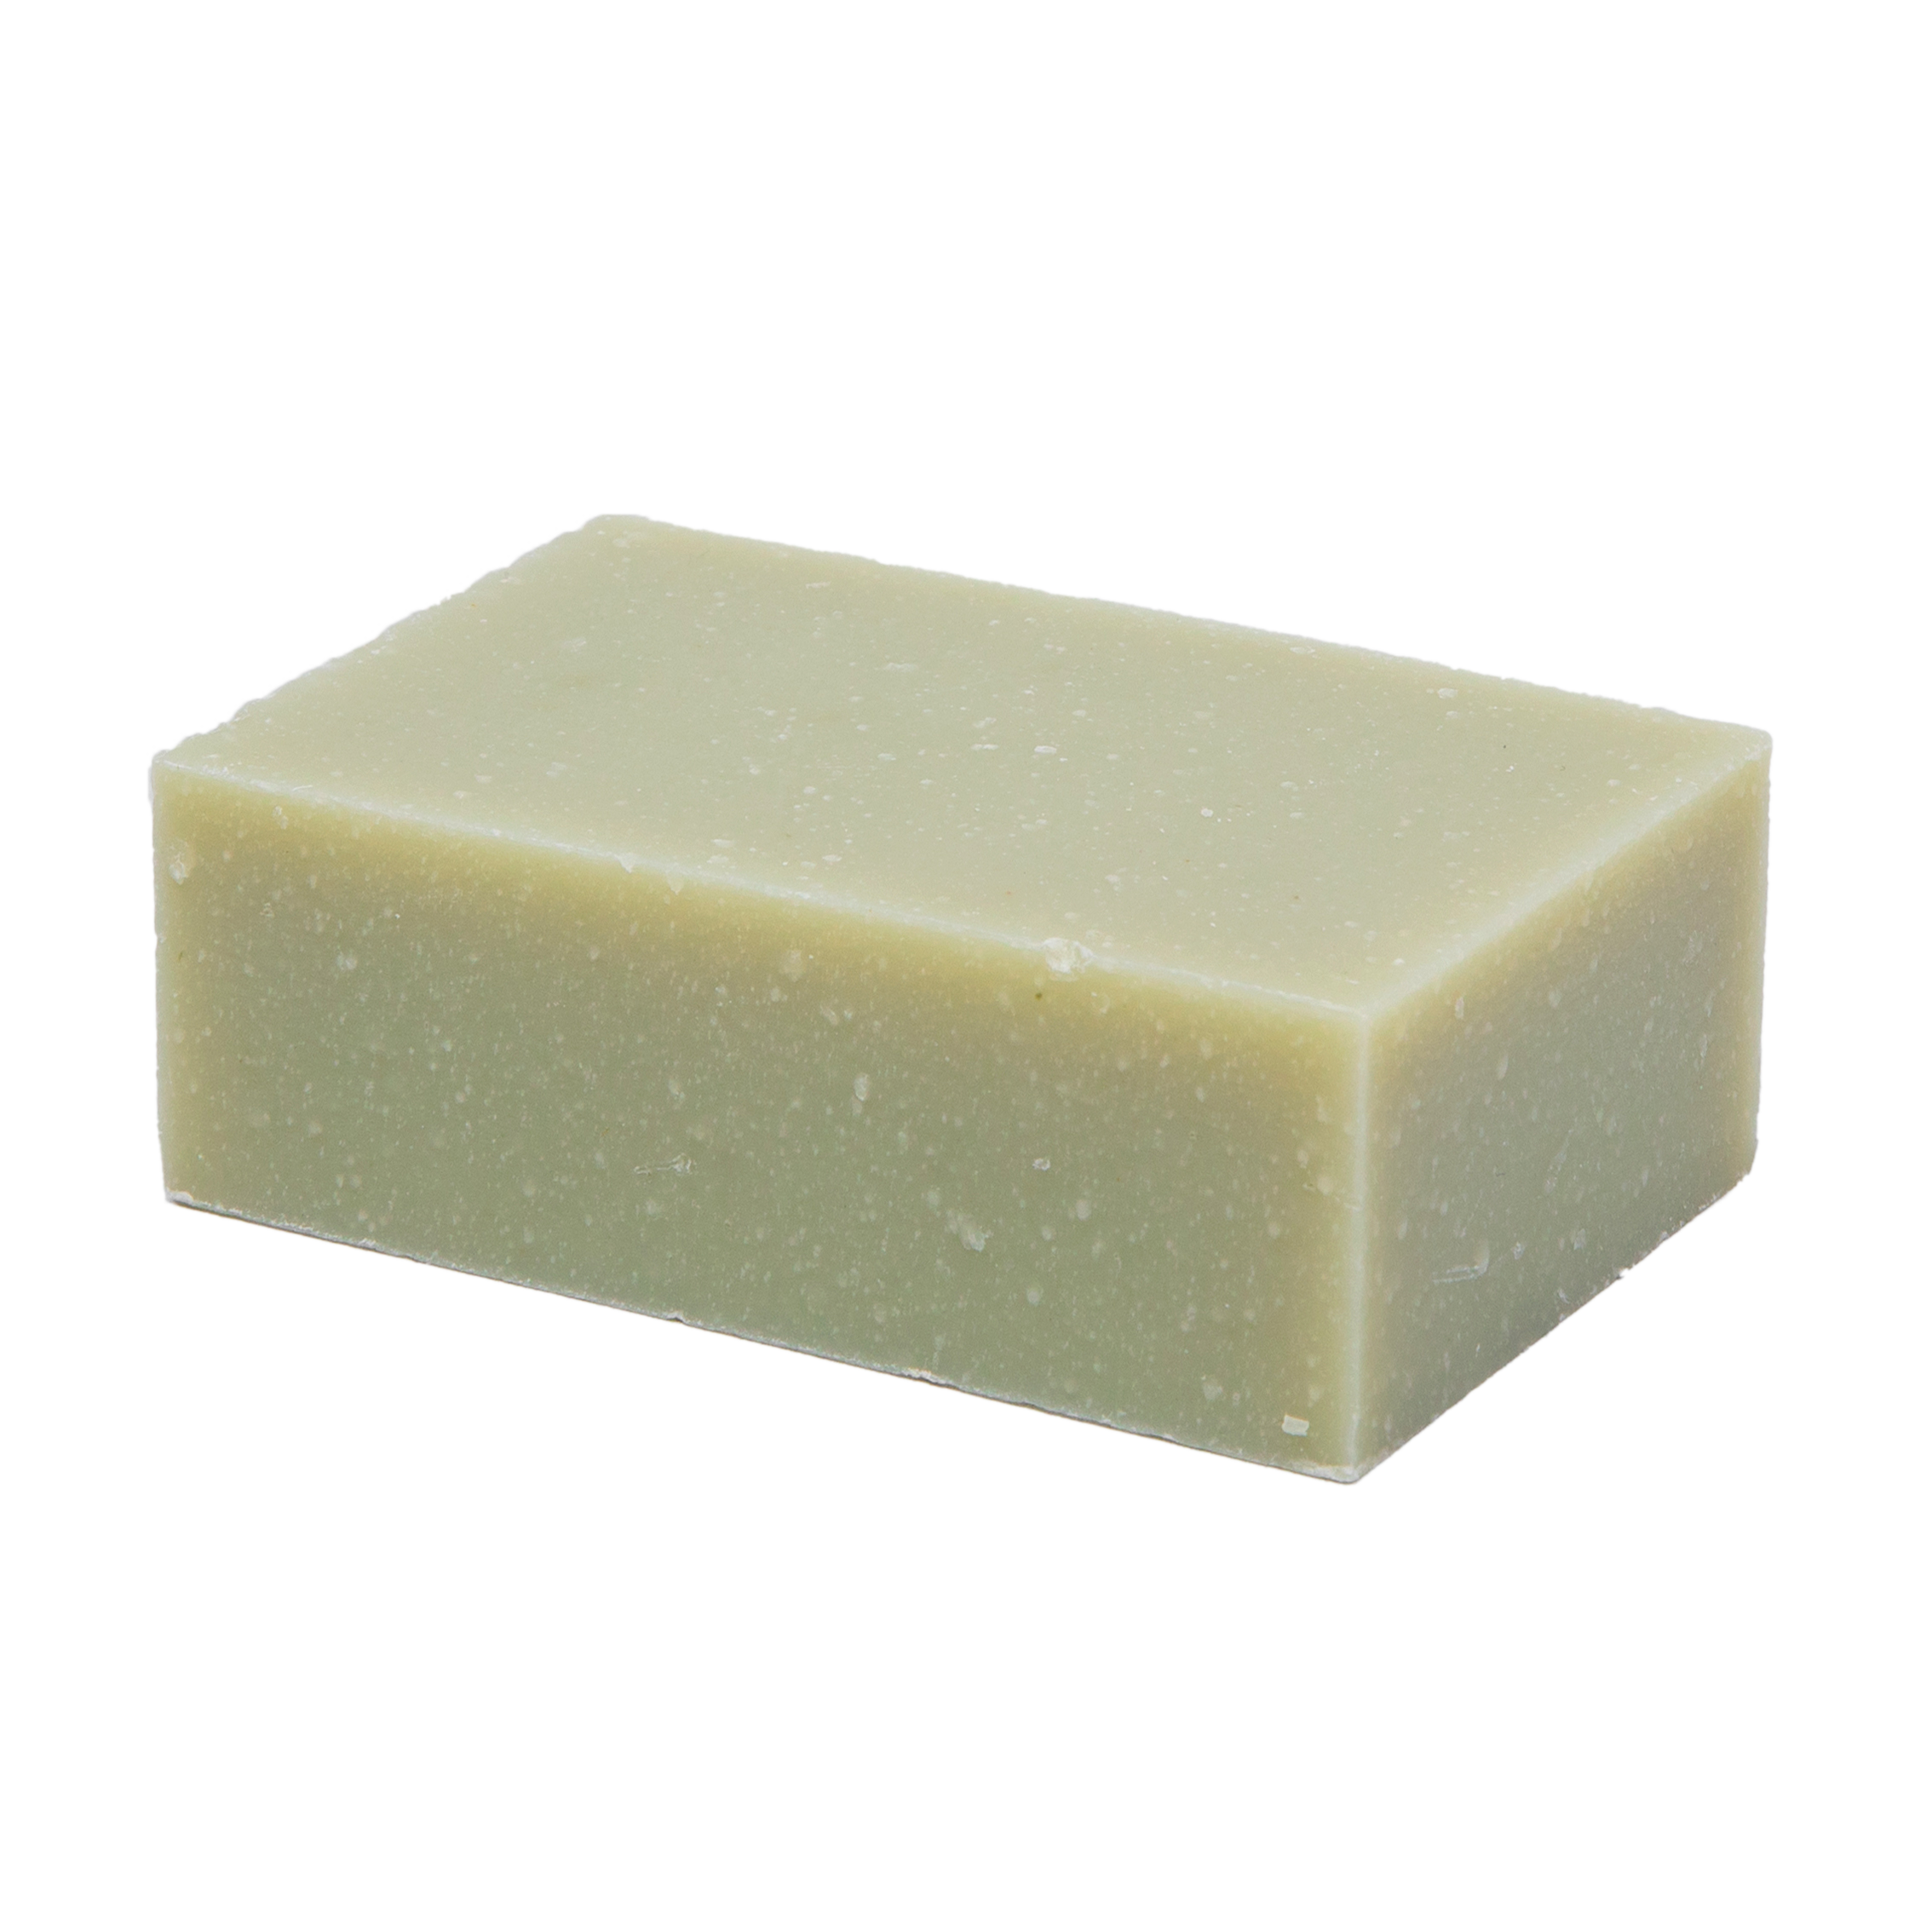 Green Clay and Olive Oil Bar Soap - 4 oz